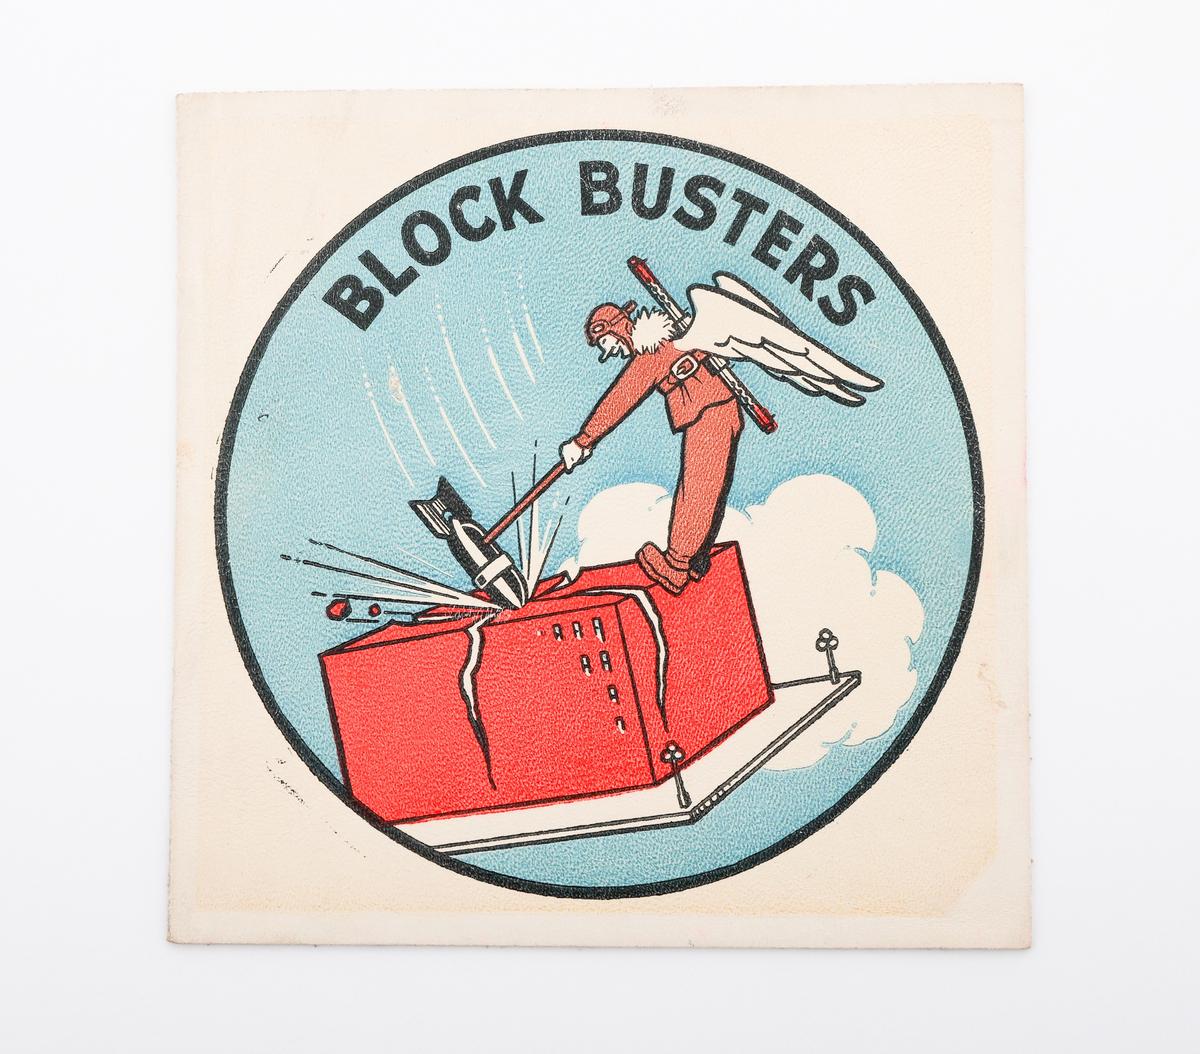 WWII USAAF "BLOCK BUSTERS" BOMBER PATCH